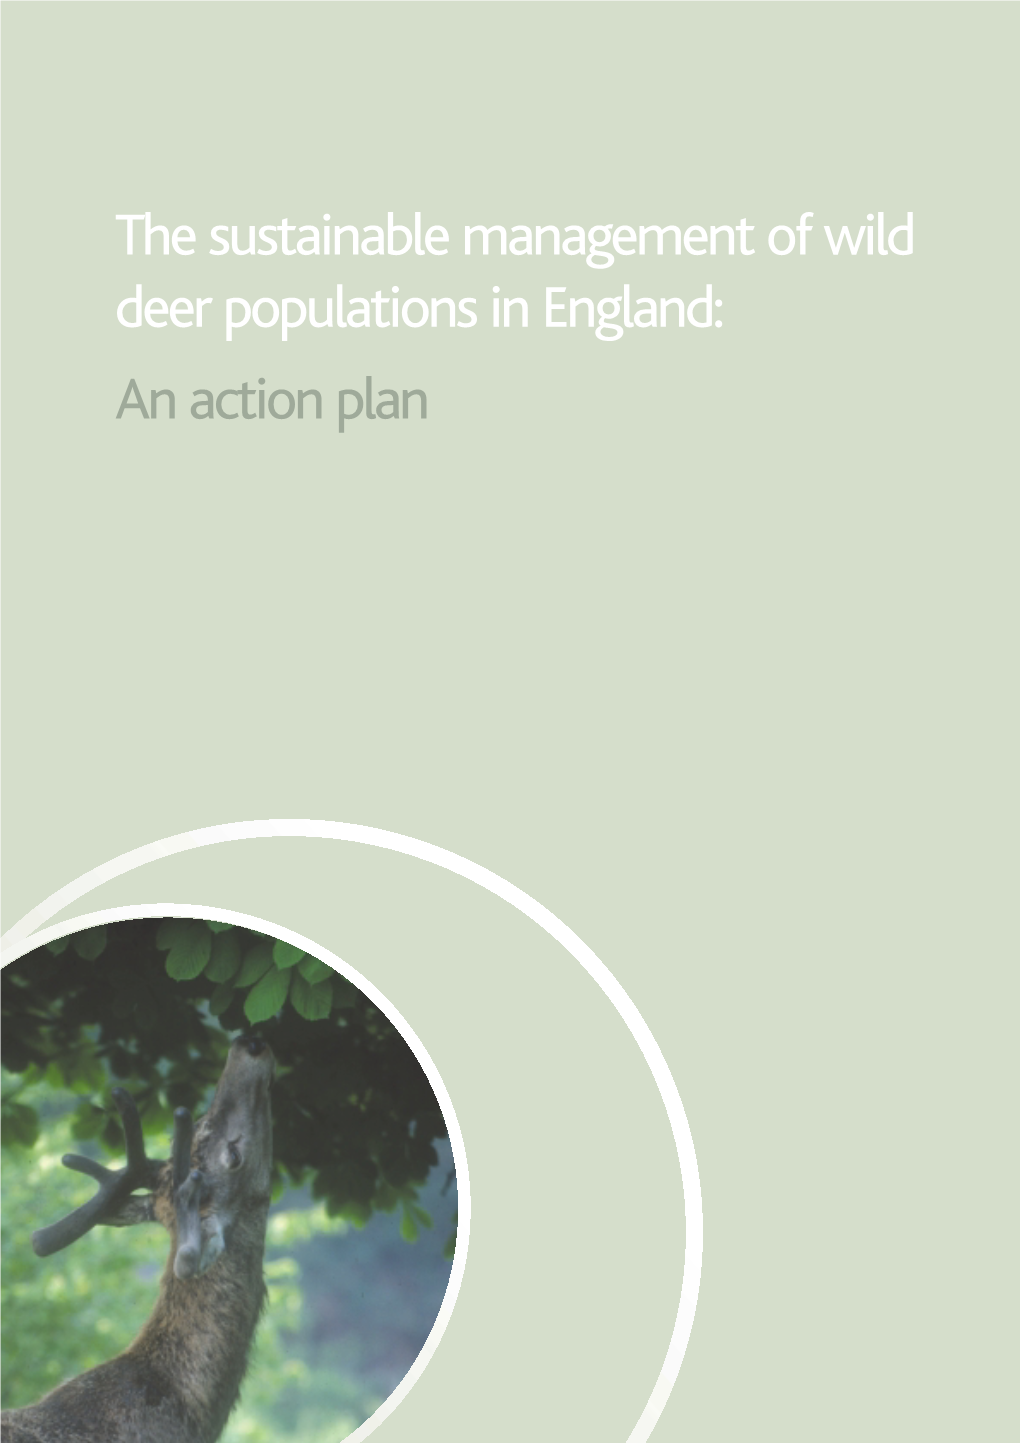 The Sustainable Management of Wild Deer Populations in England: an Action Plan Foreword